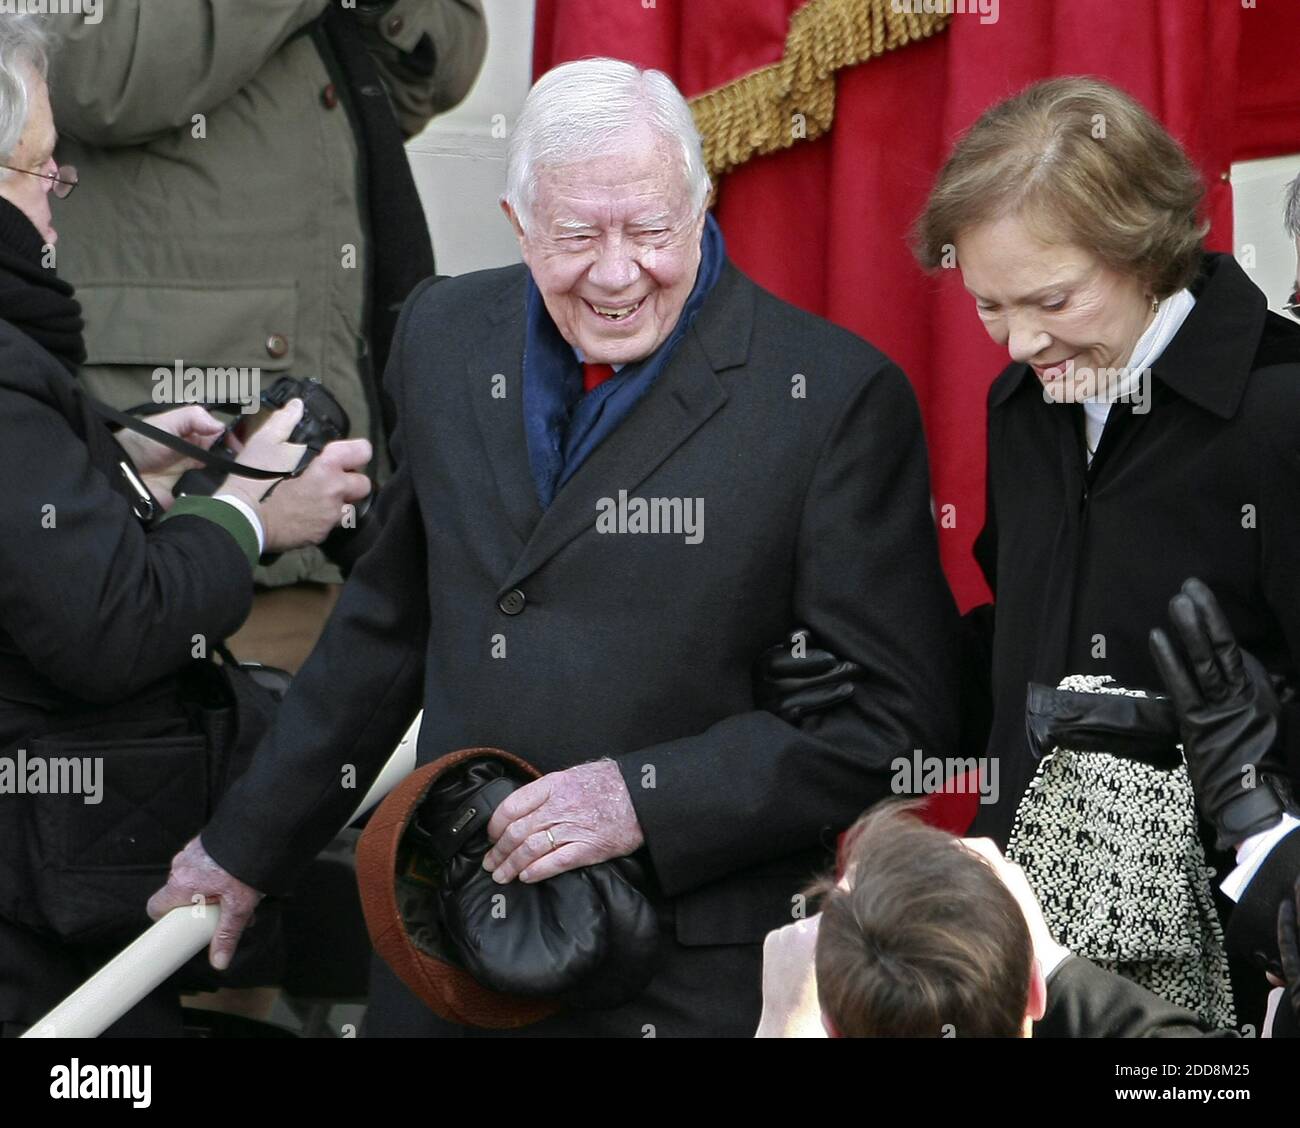 NO FILM, NO VIDEO, NO TV, NO DOCUMENTARY - Former president Jimmy Carter and wife Rosalynn arrive at the inauguration of Barack Obama as 44th U.S. President in Washington D.C., USA, onTuesday, January 20, 2009. Obama becomes the first African-American to be elected to the office of President in the history of the United States. Photo by Mark Wilson/POOL/MCT/ABACAPRESS.COM Stock Photo